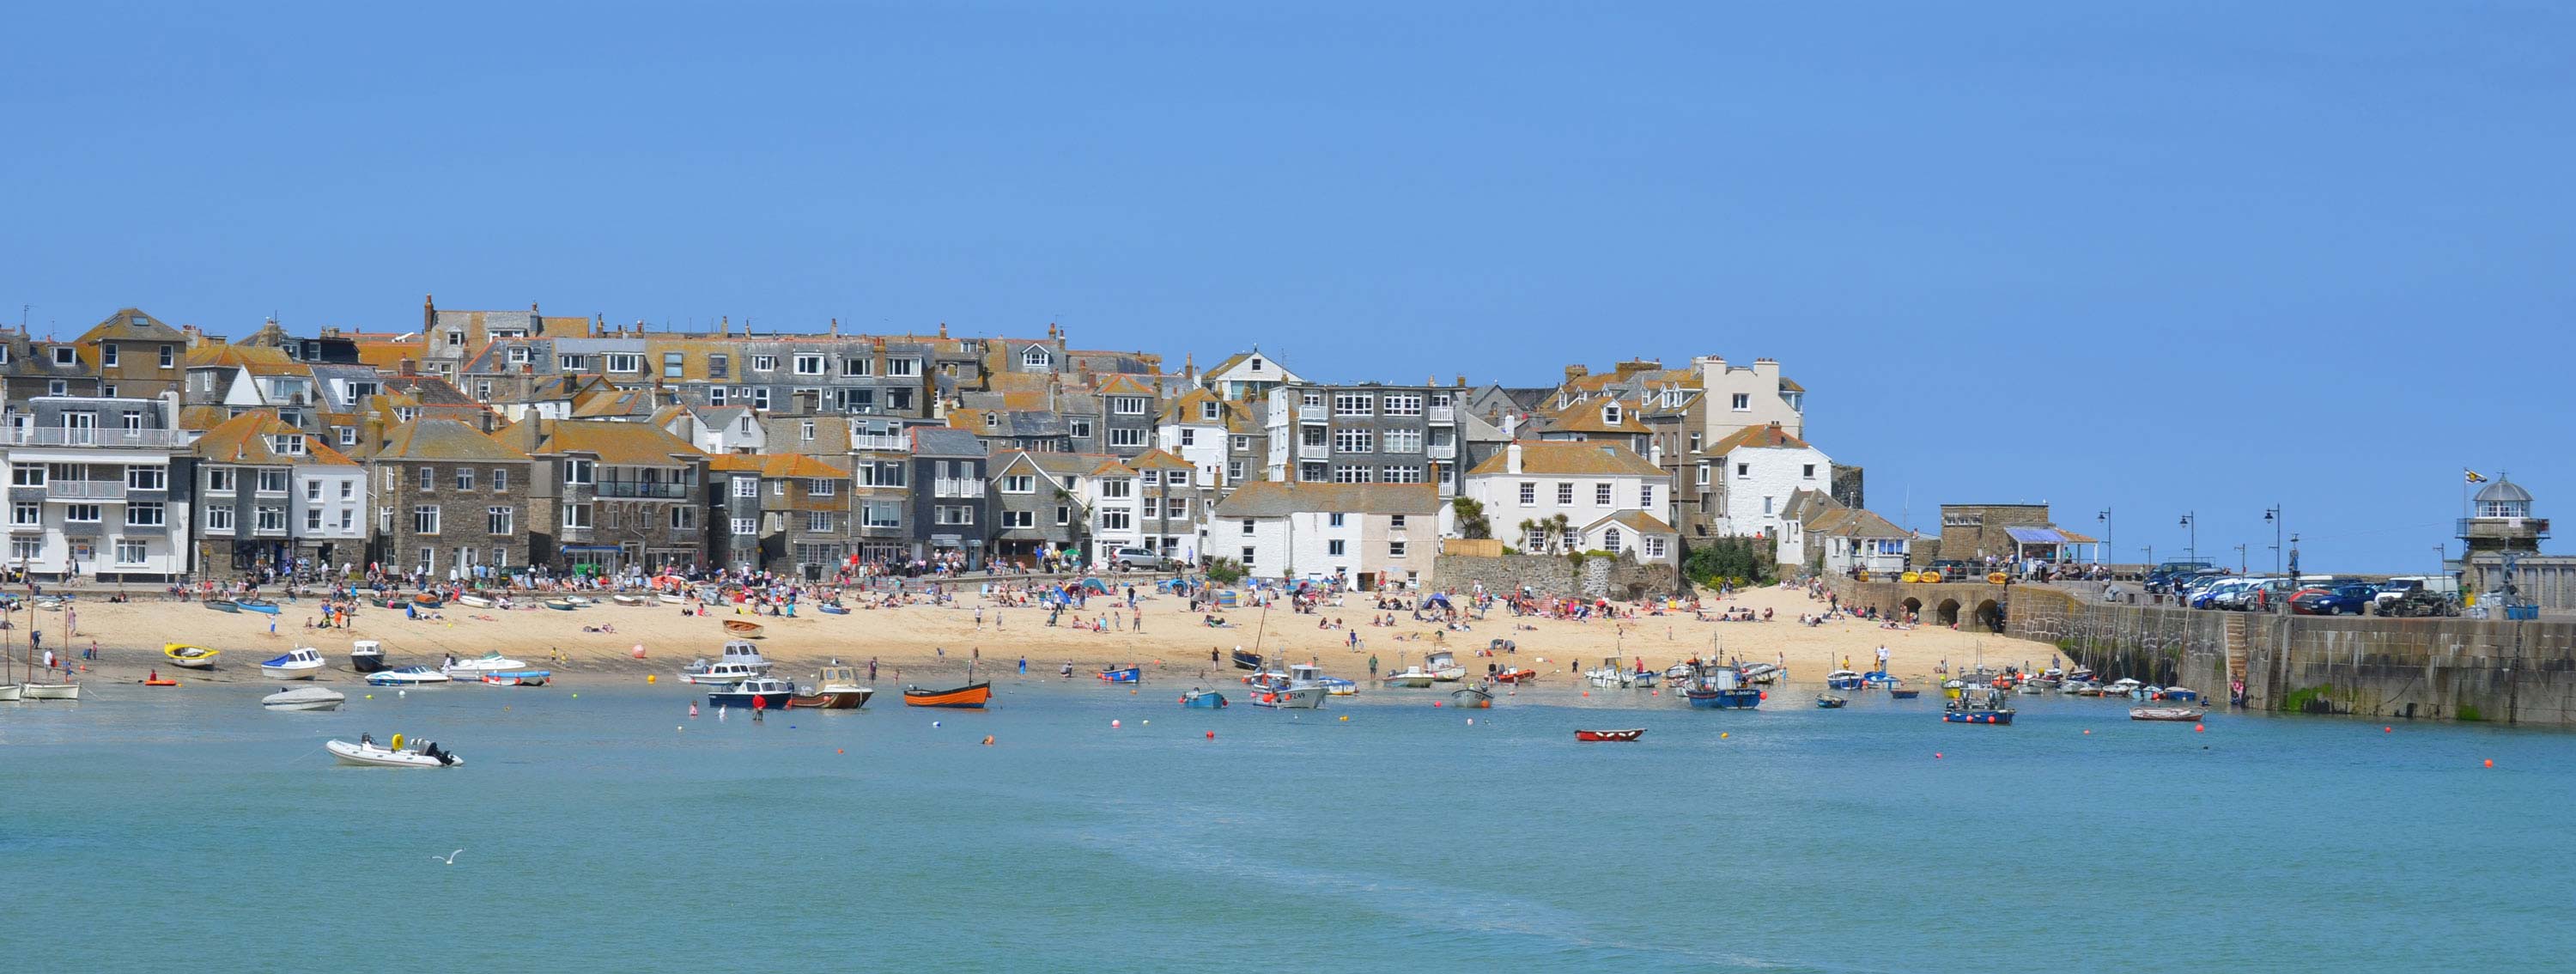 Beautiful accommodation in St Ives, Cornwall
Call to book on 01736 799385